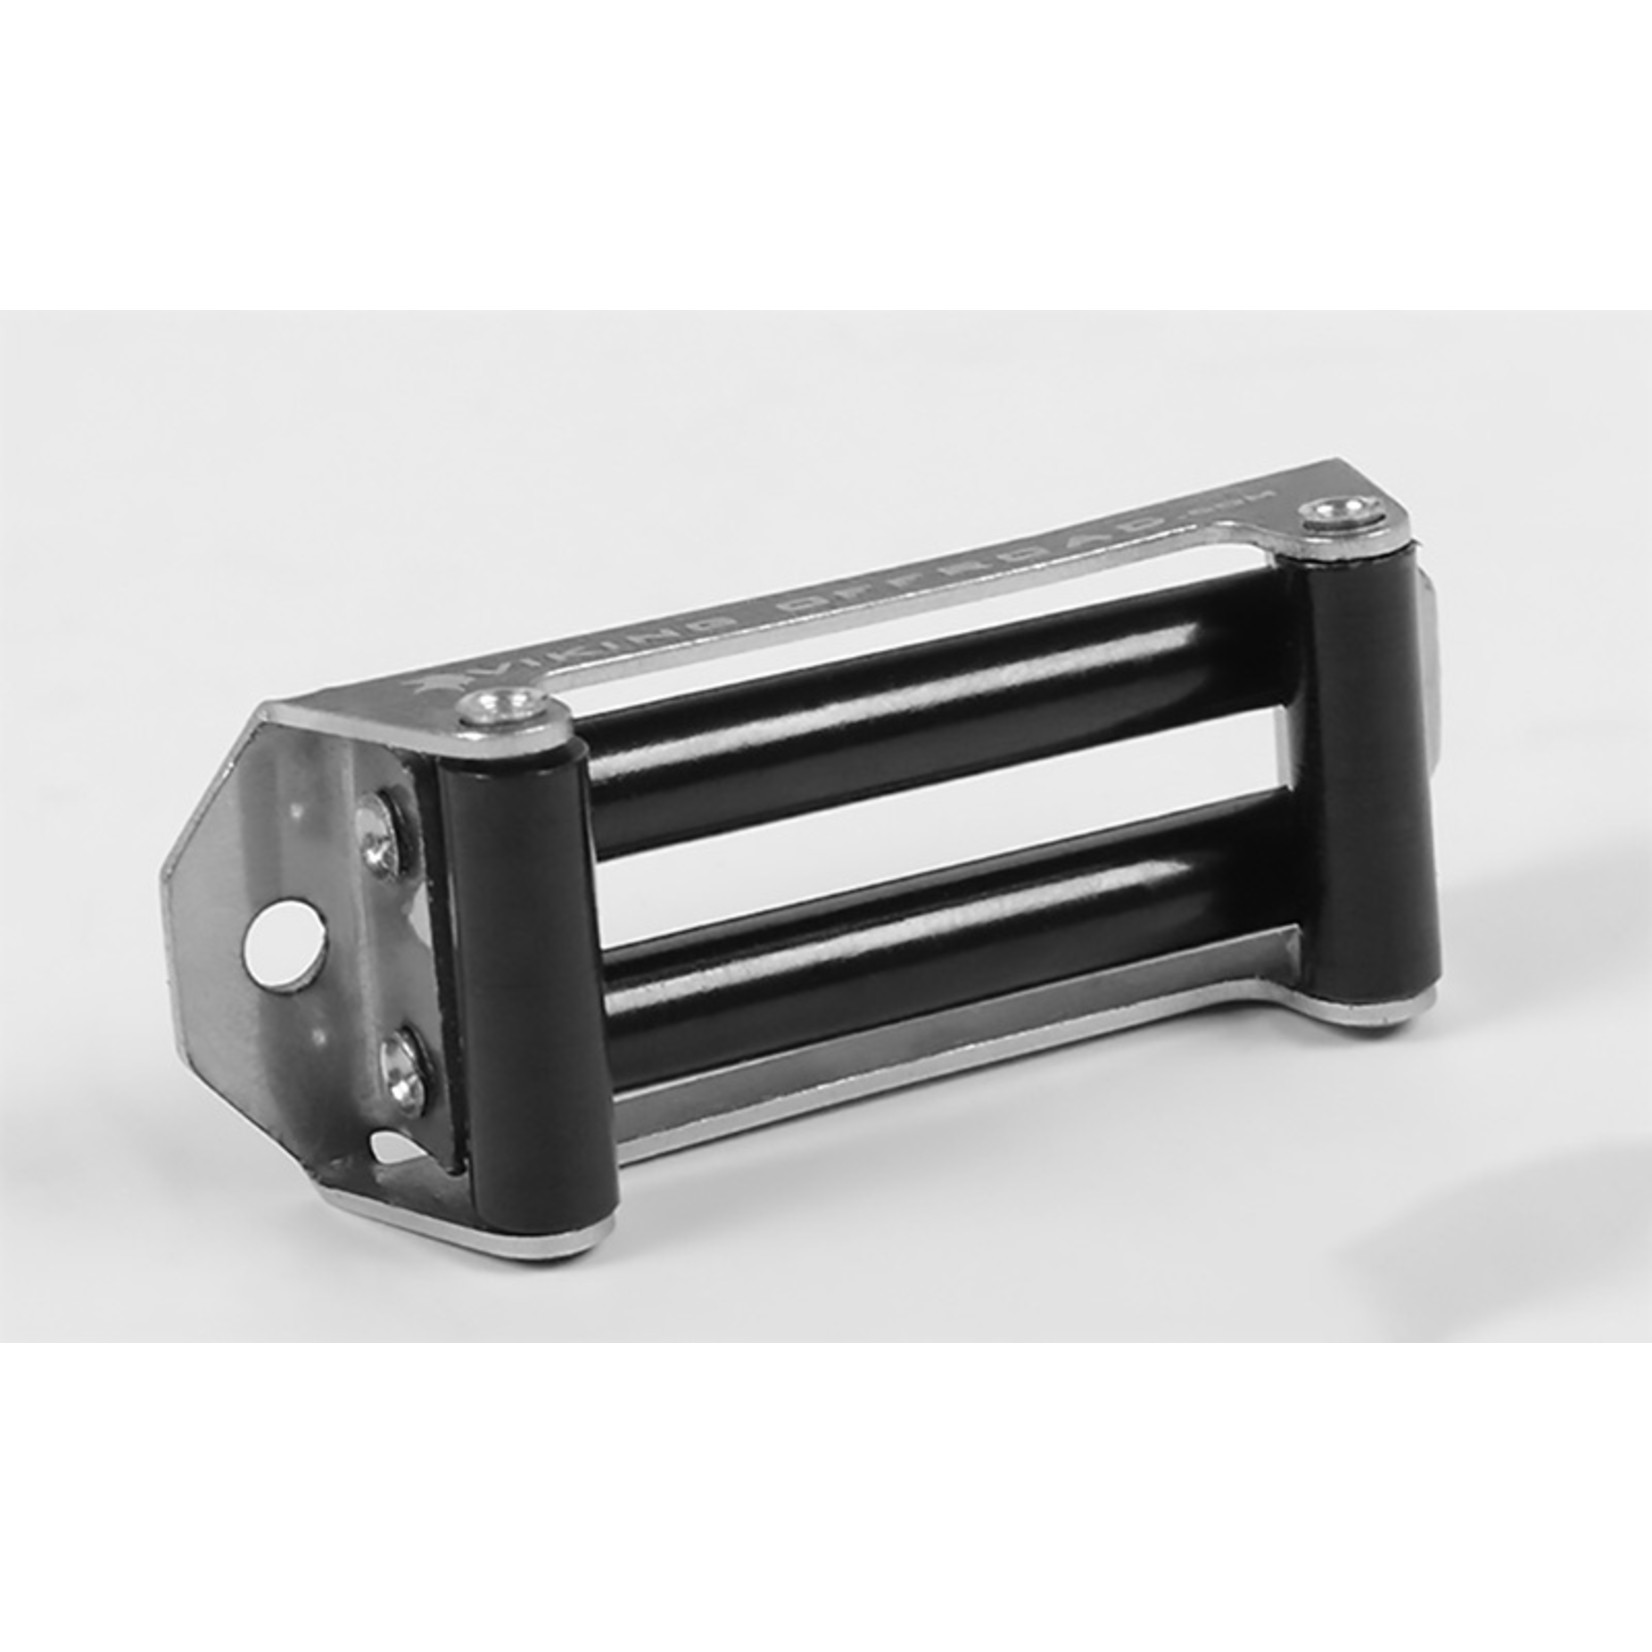 RC4WD RC4ZS1498 - 1/10 Viking Roller Fairlead for Warn 9.5cti Winch